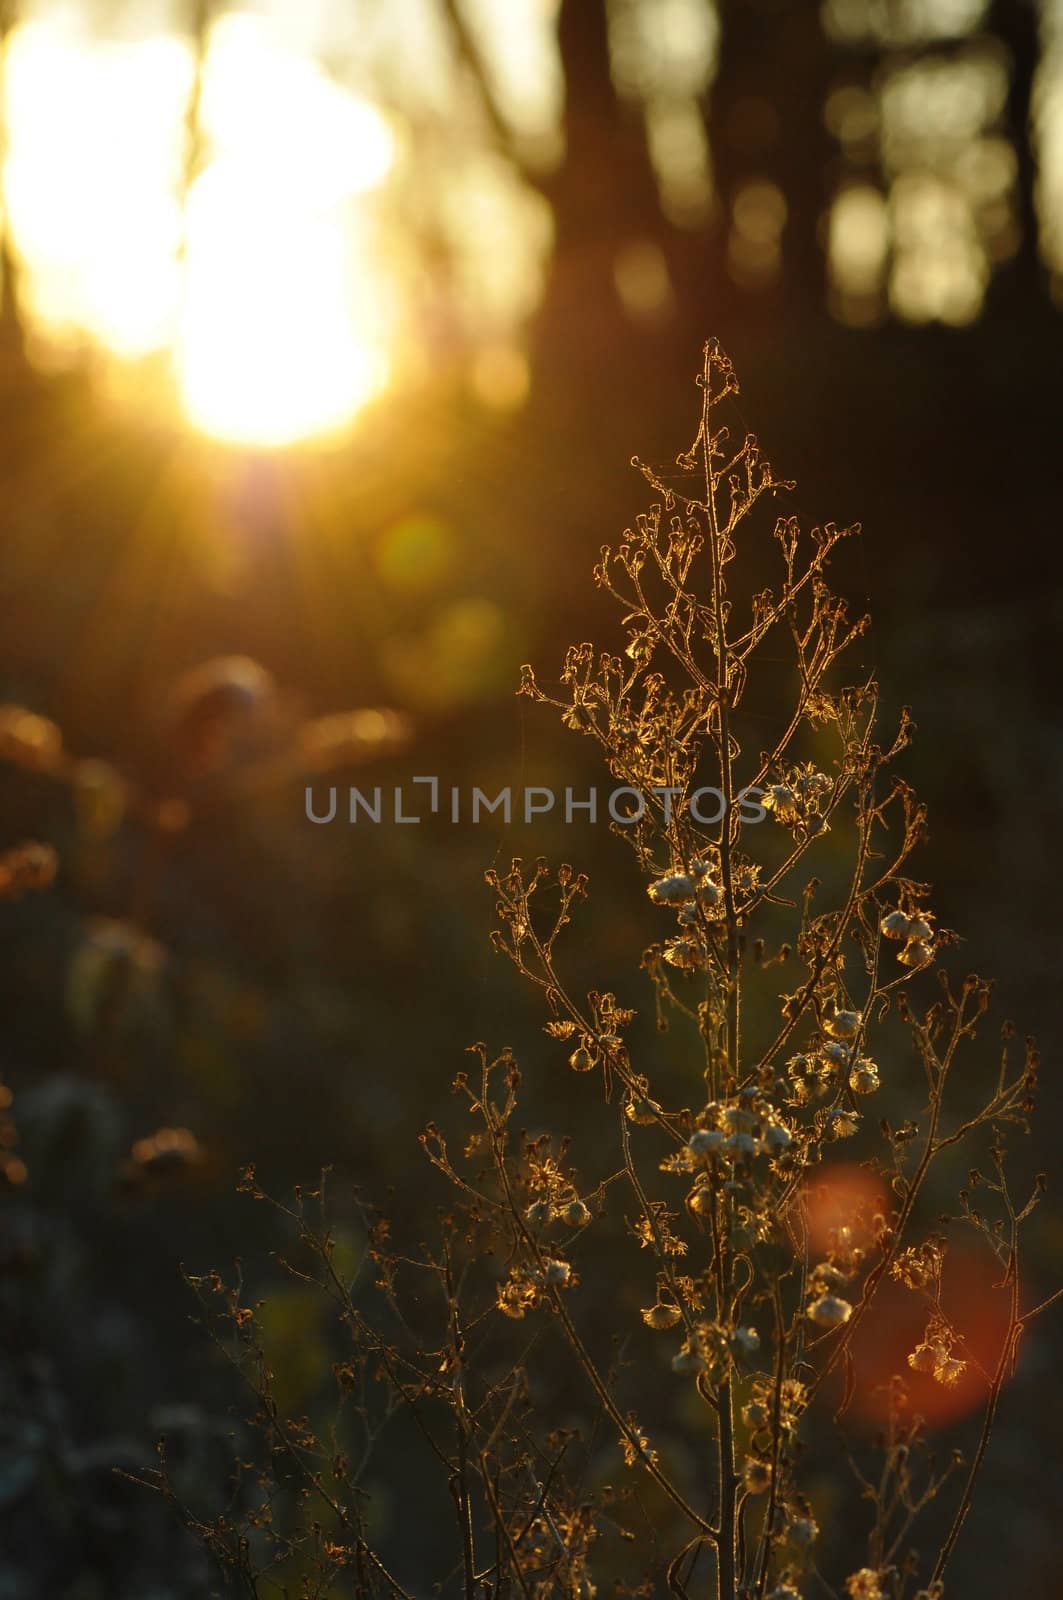 Orange Morning Sunlight through Thin Branches of a Plant